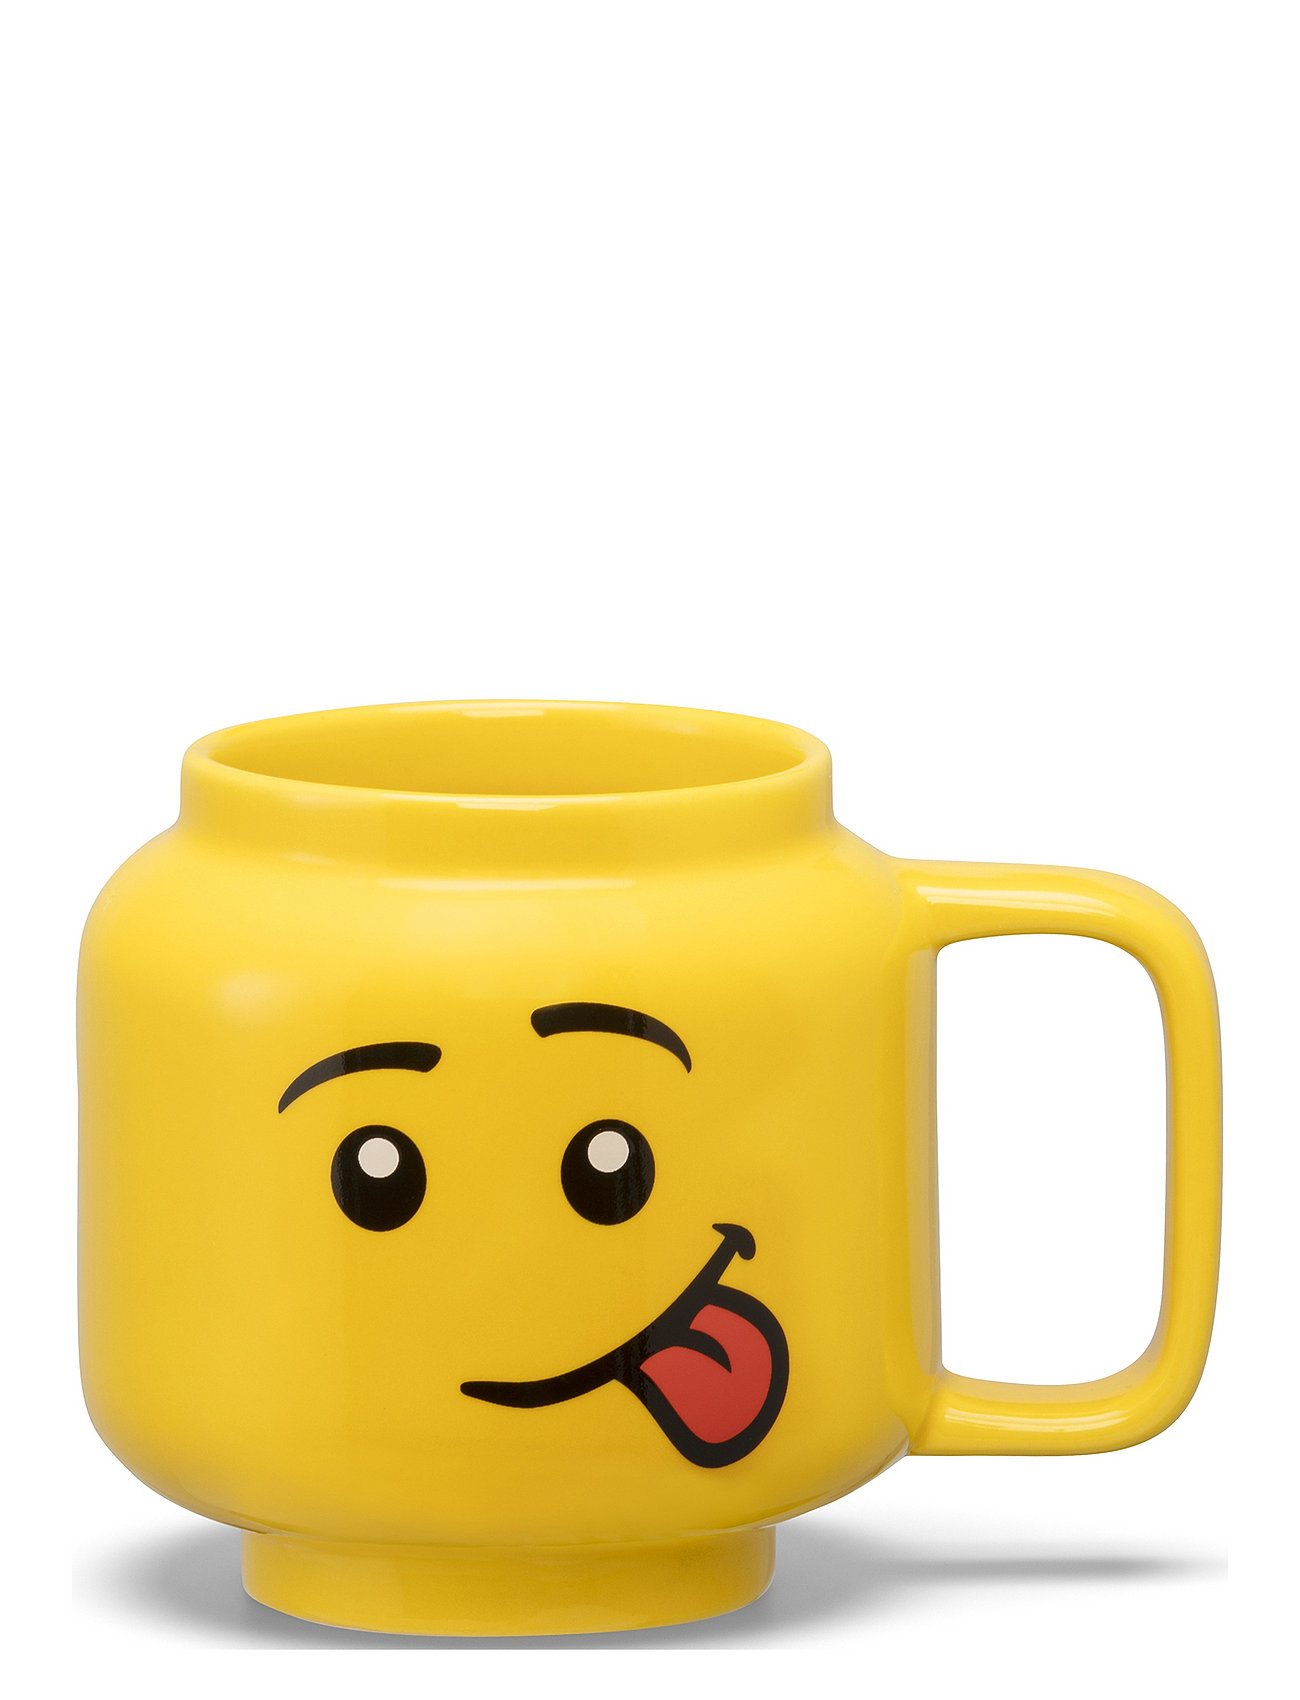 Lego Ceramic Mug Small Silly Home Meal Time Cups & Mugs Cups Yellow LEGO STORAGE